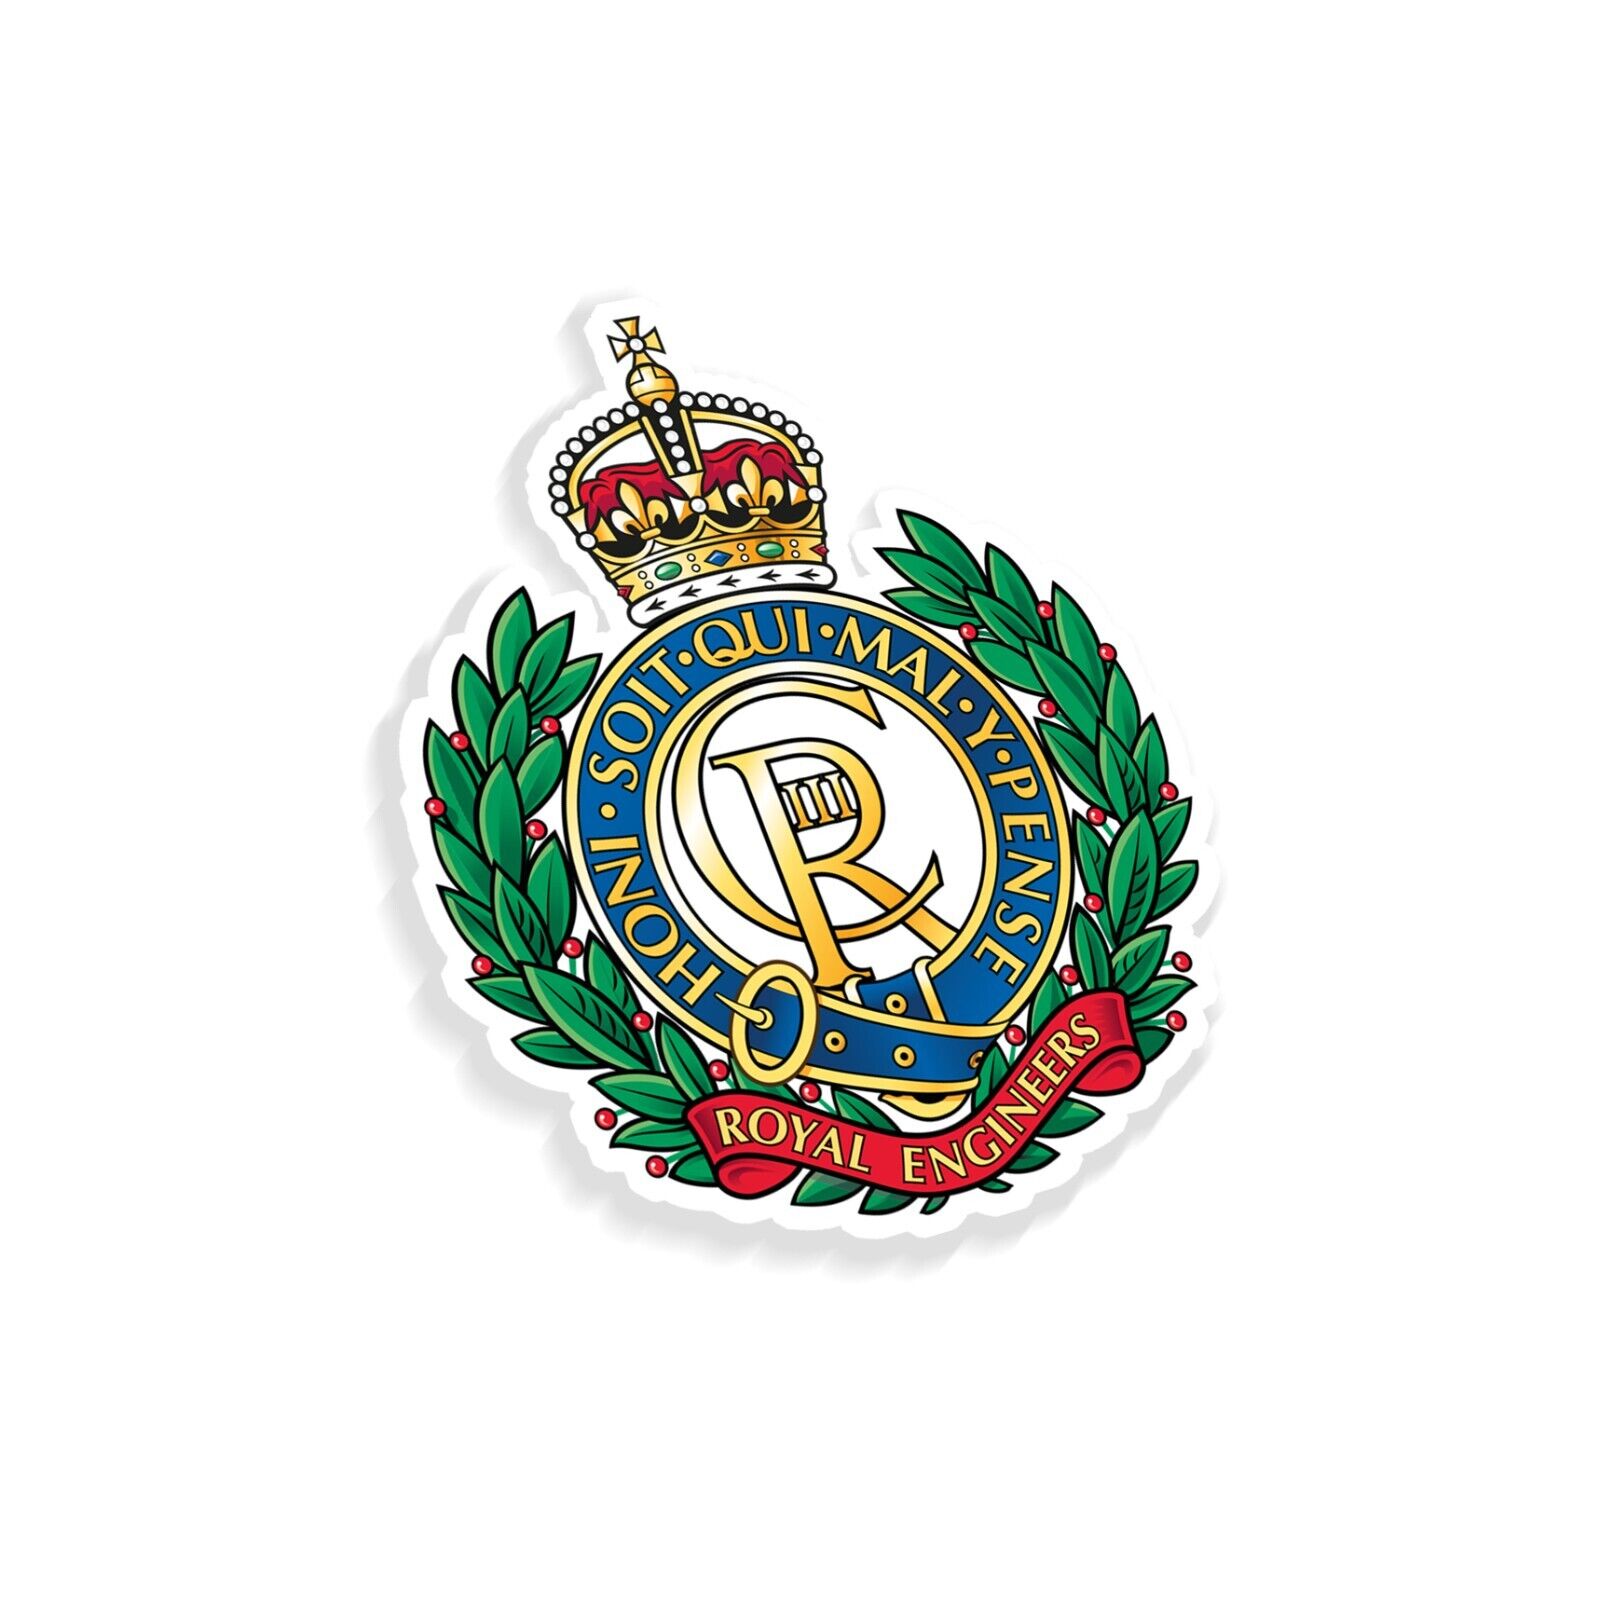 NEW STYLE CORPS OF ROYAL ENGINEERS STICKER - BRITISH ARMY - SAPPERS